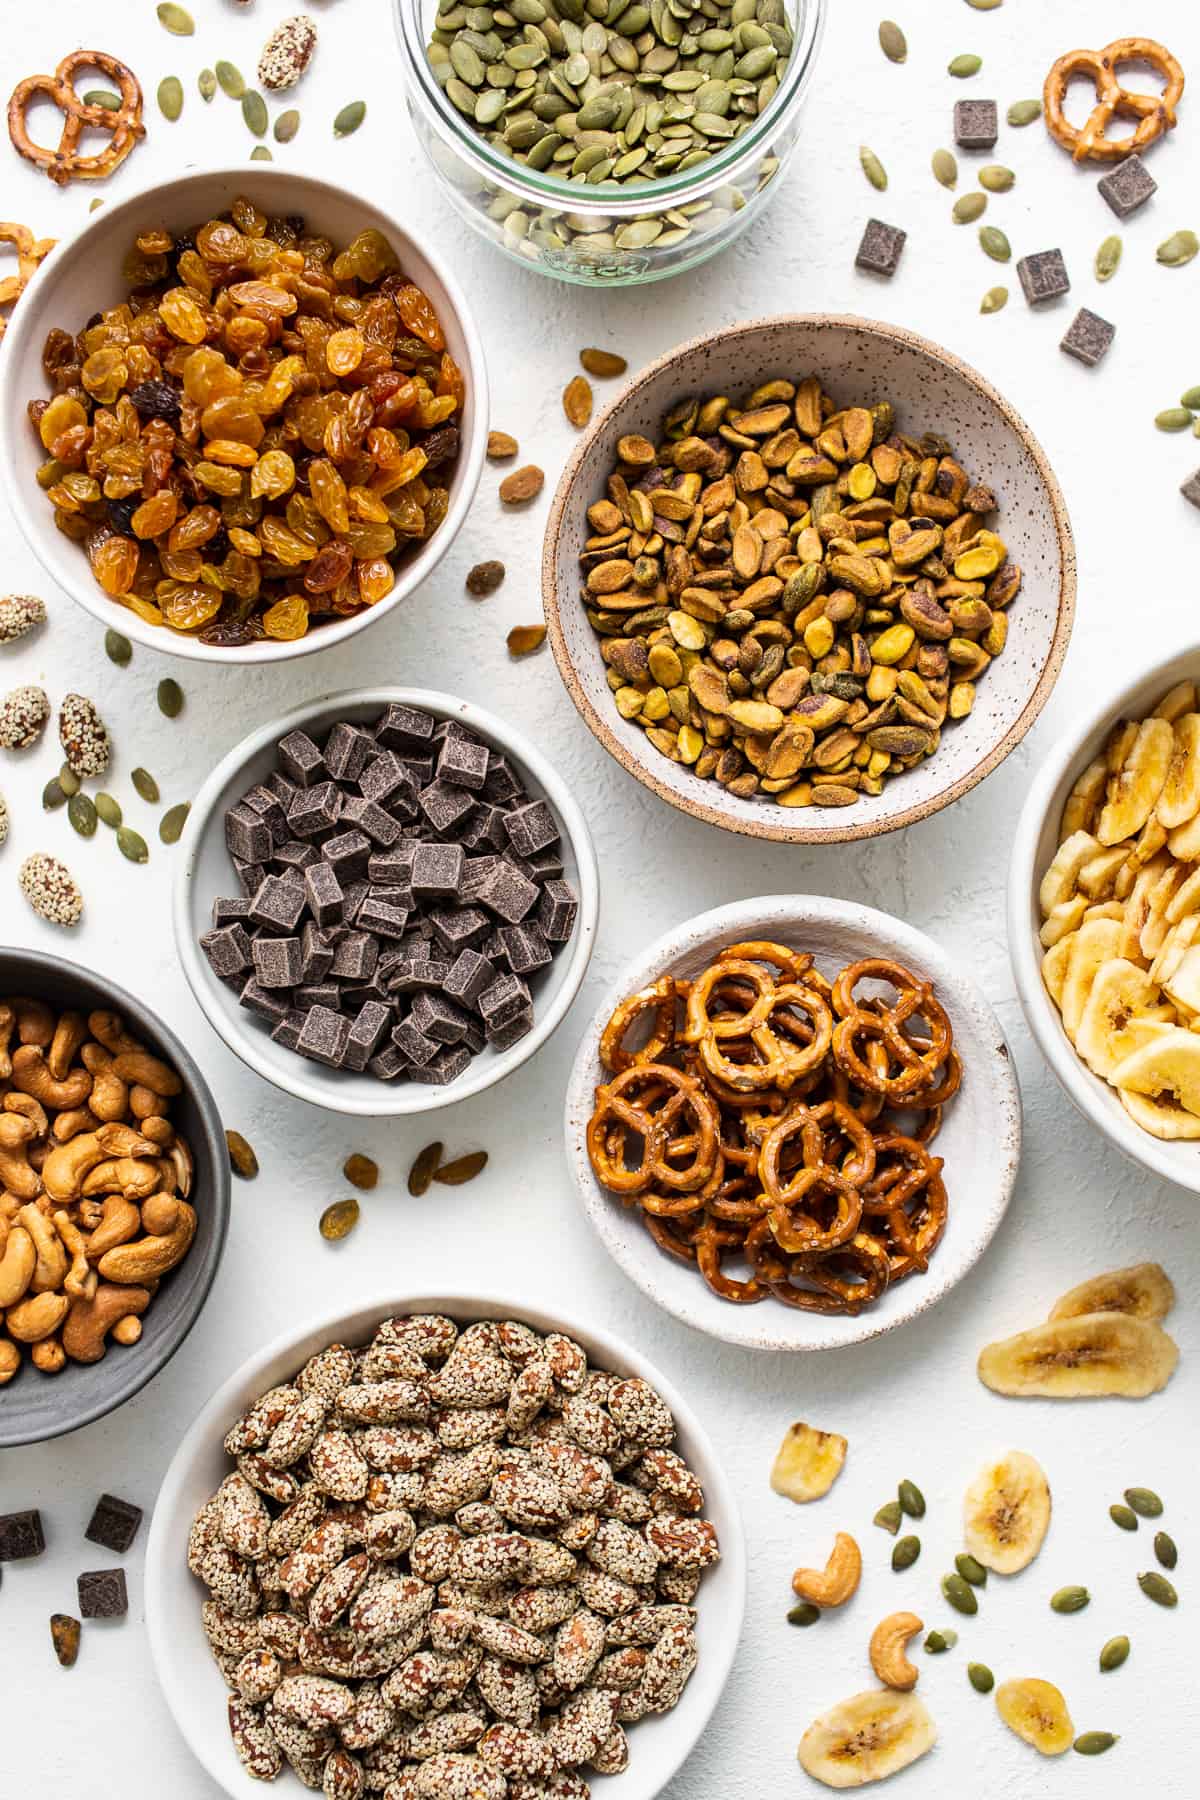 Homemade trail mix ingredients in bowls.